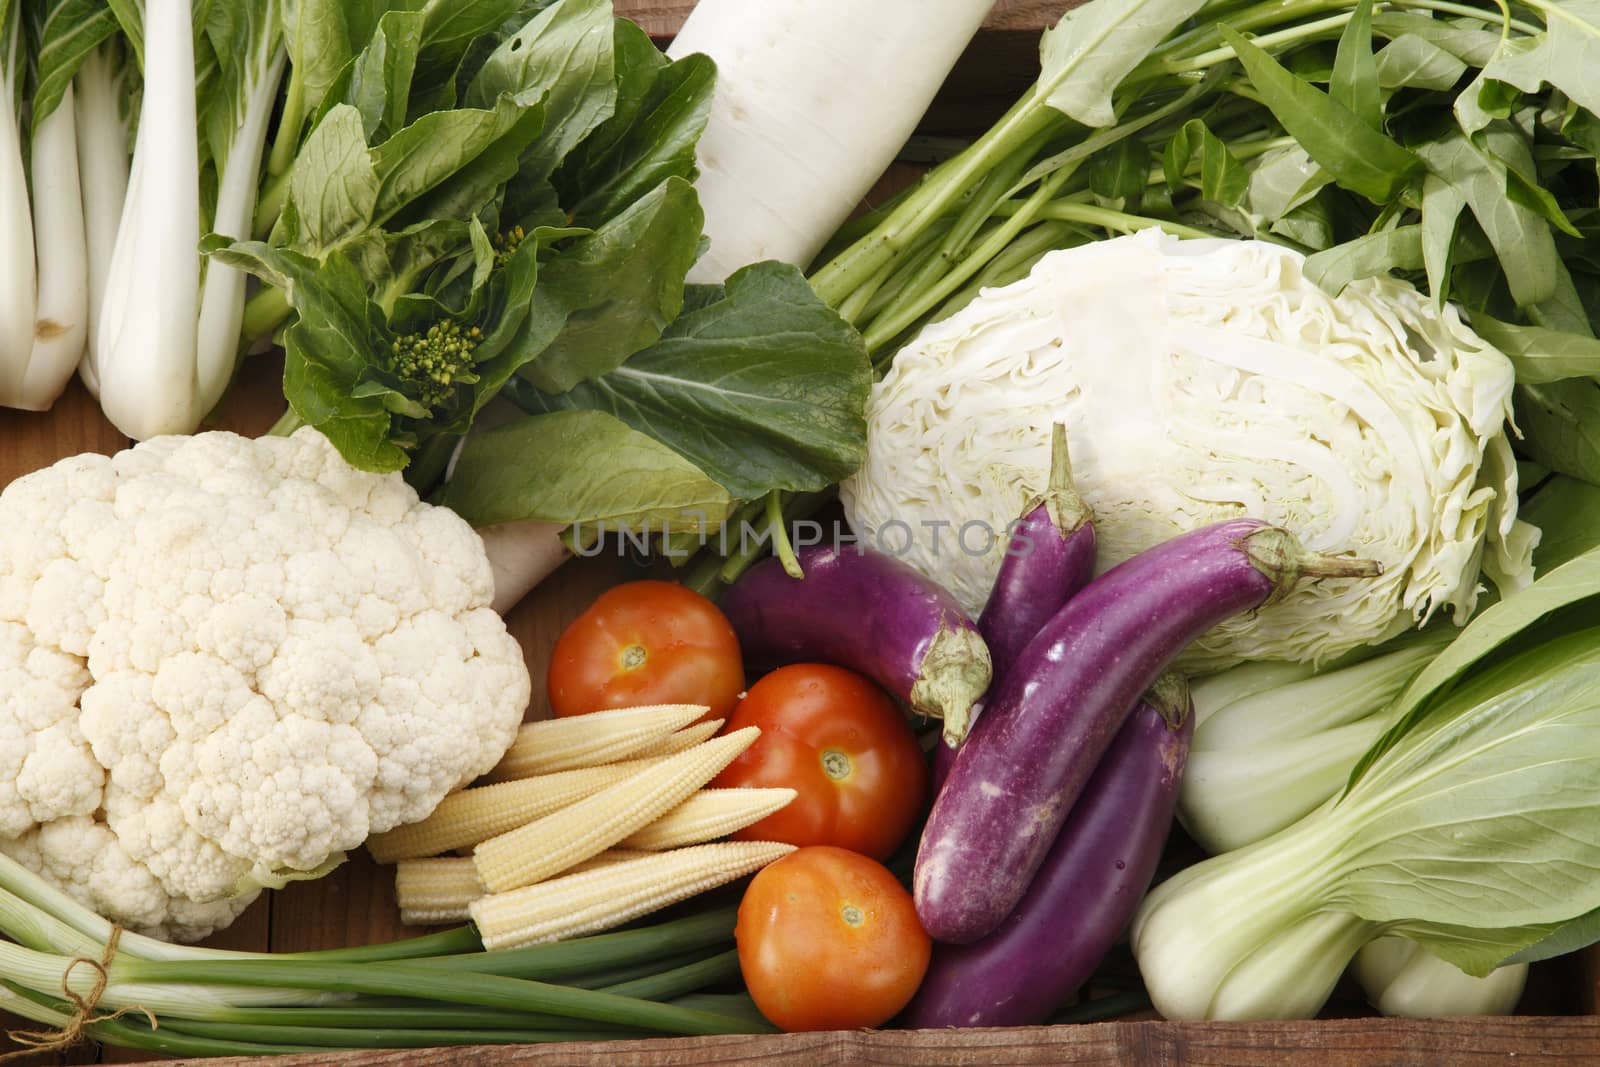 top view group shot of vegetables in a create